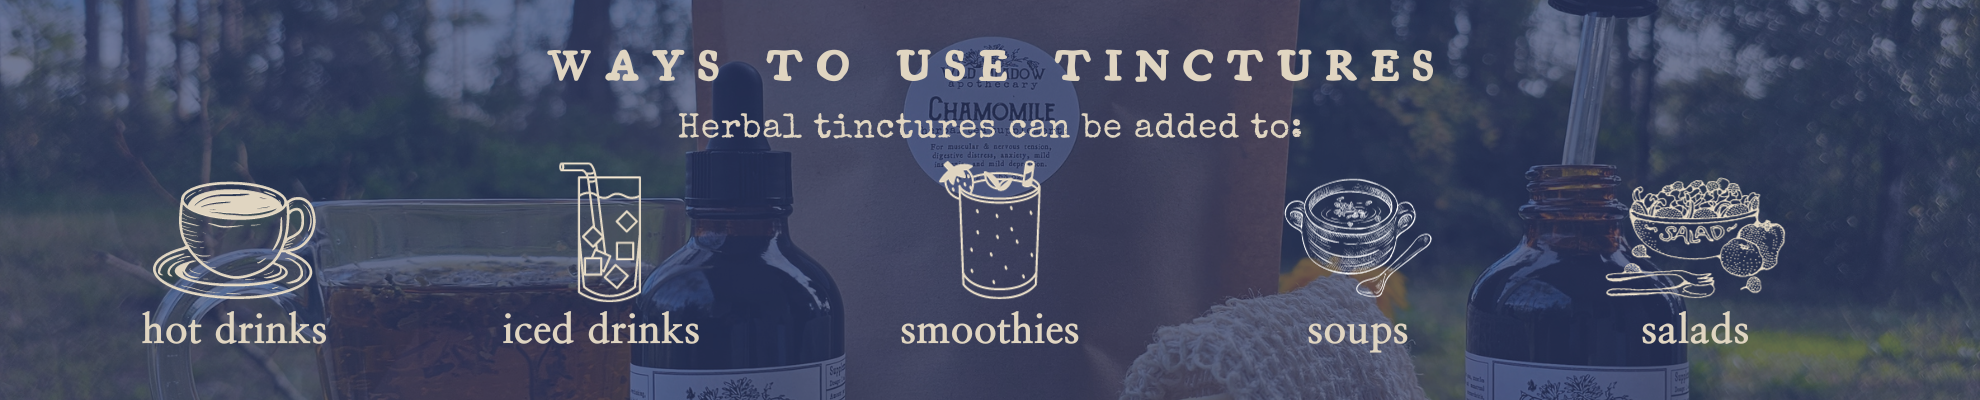 alternative ways to use tinctures: add to hot drinks, smoothies, iced drinks, soups, and salads